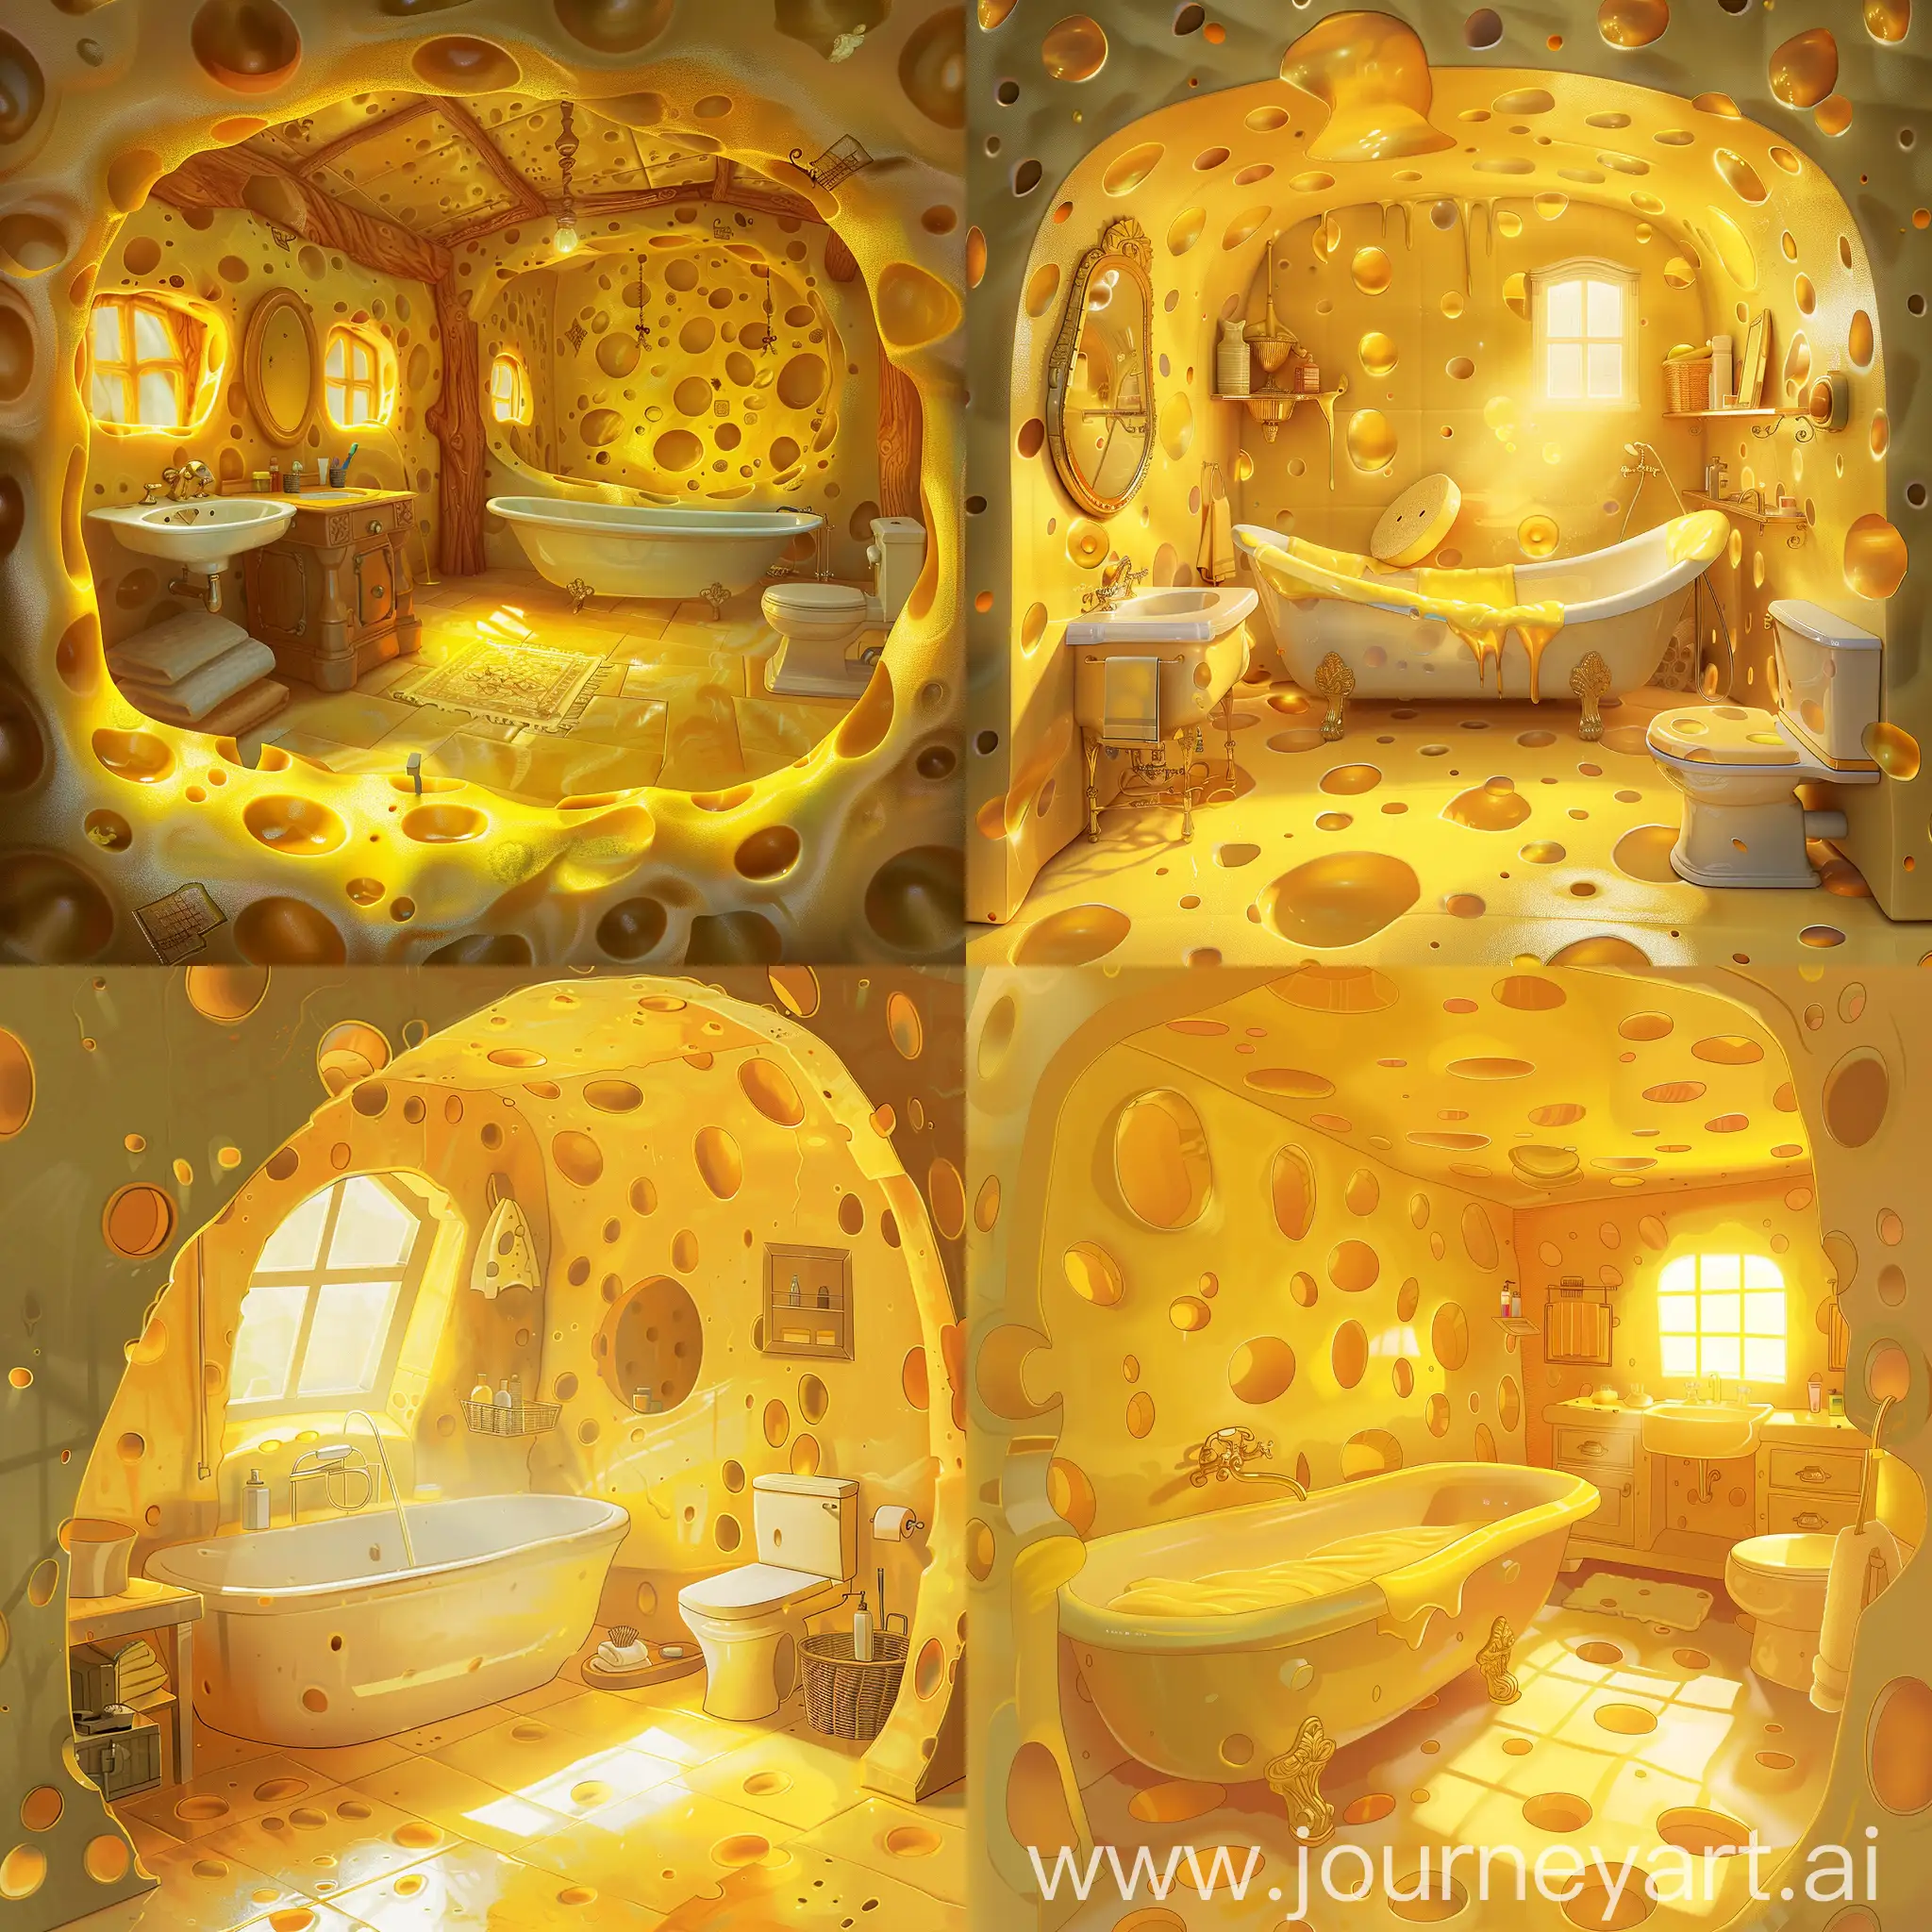 Bathroom constructed from yellow Swiss cheese, Bathtub, Sink, Commode, Warm and inviting, Soft lighting, Cozy and comfortable, Highly detailed, Realistic, Whimsical and imaginative, Digital illustration, Golden and yellow hues, High quality